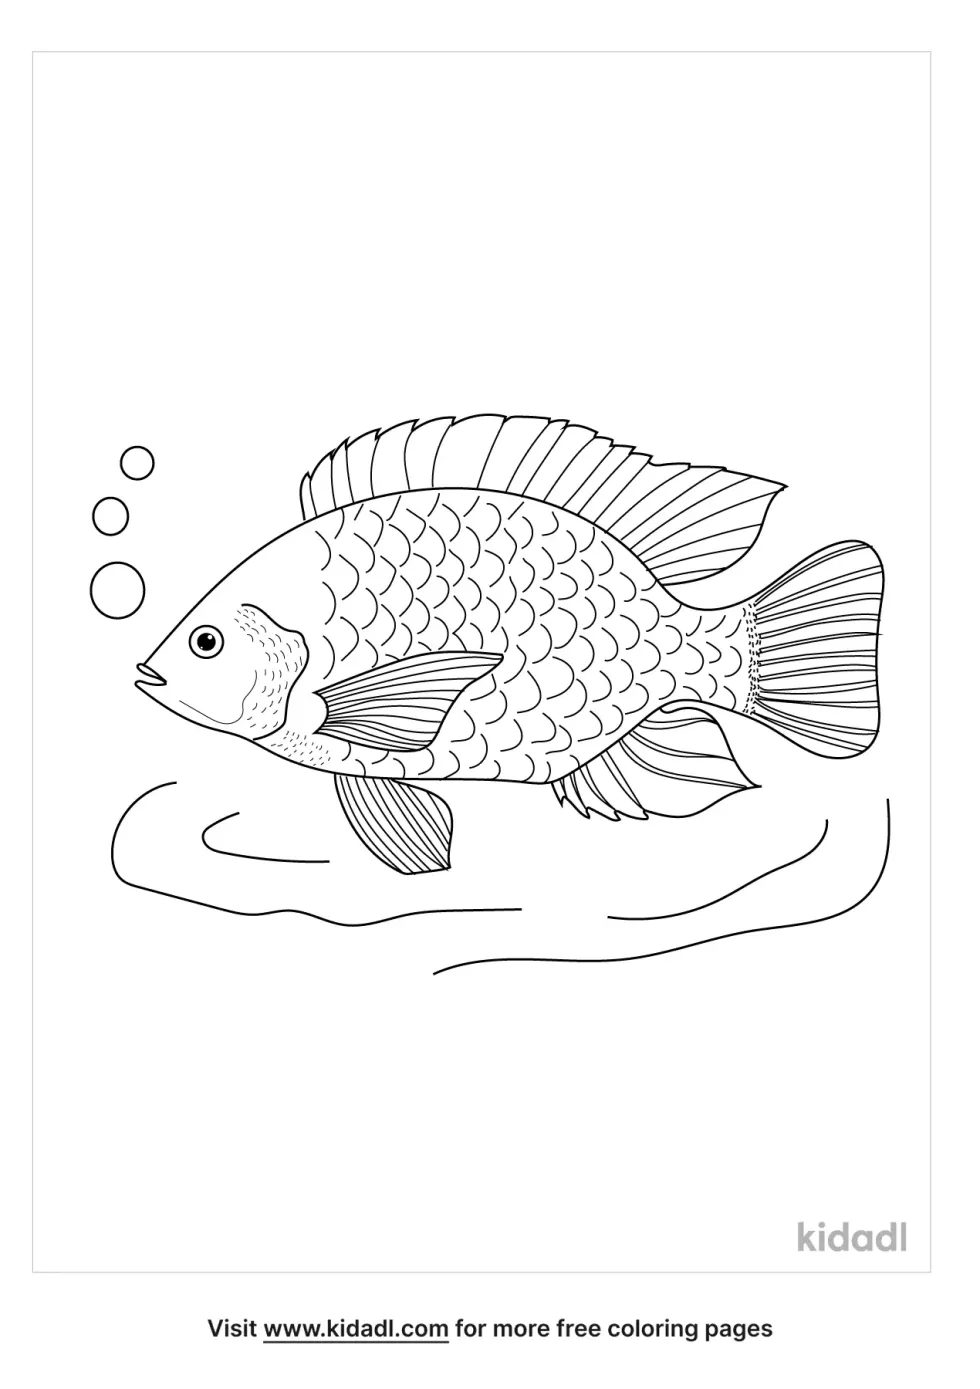 Nile Tilapia Coloring Page